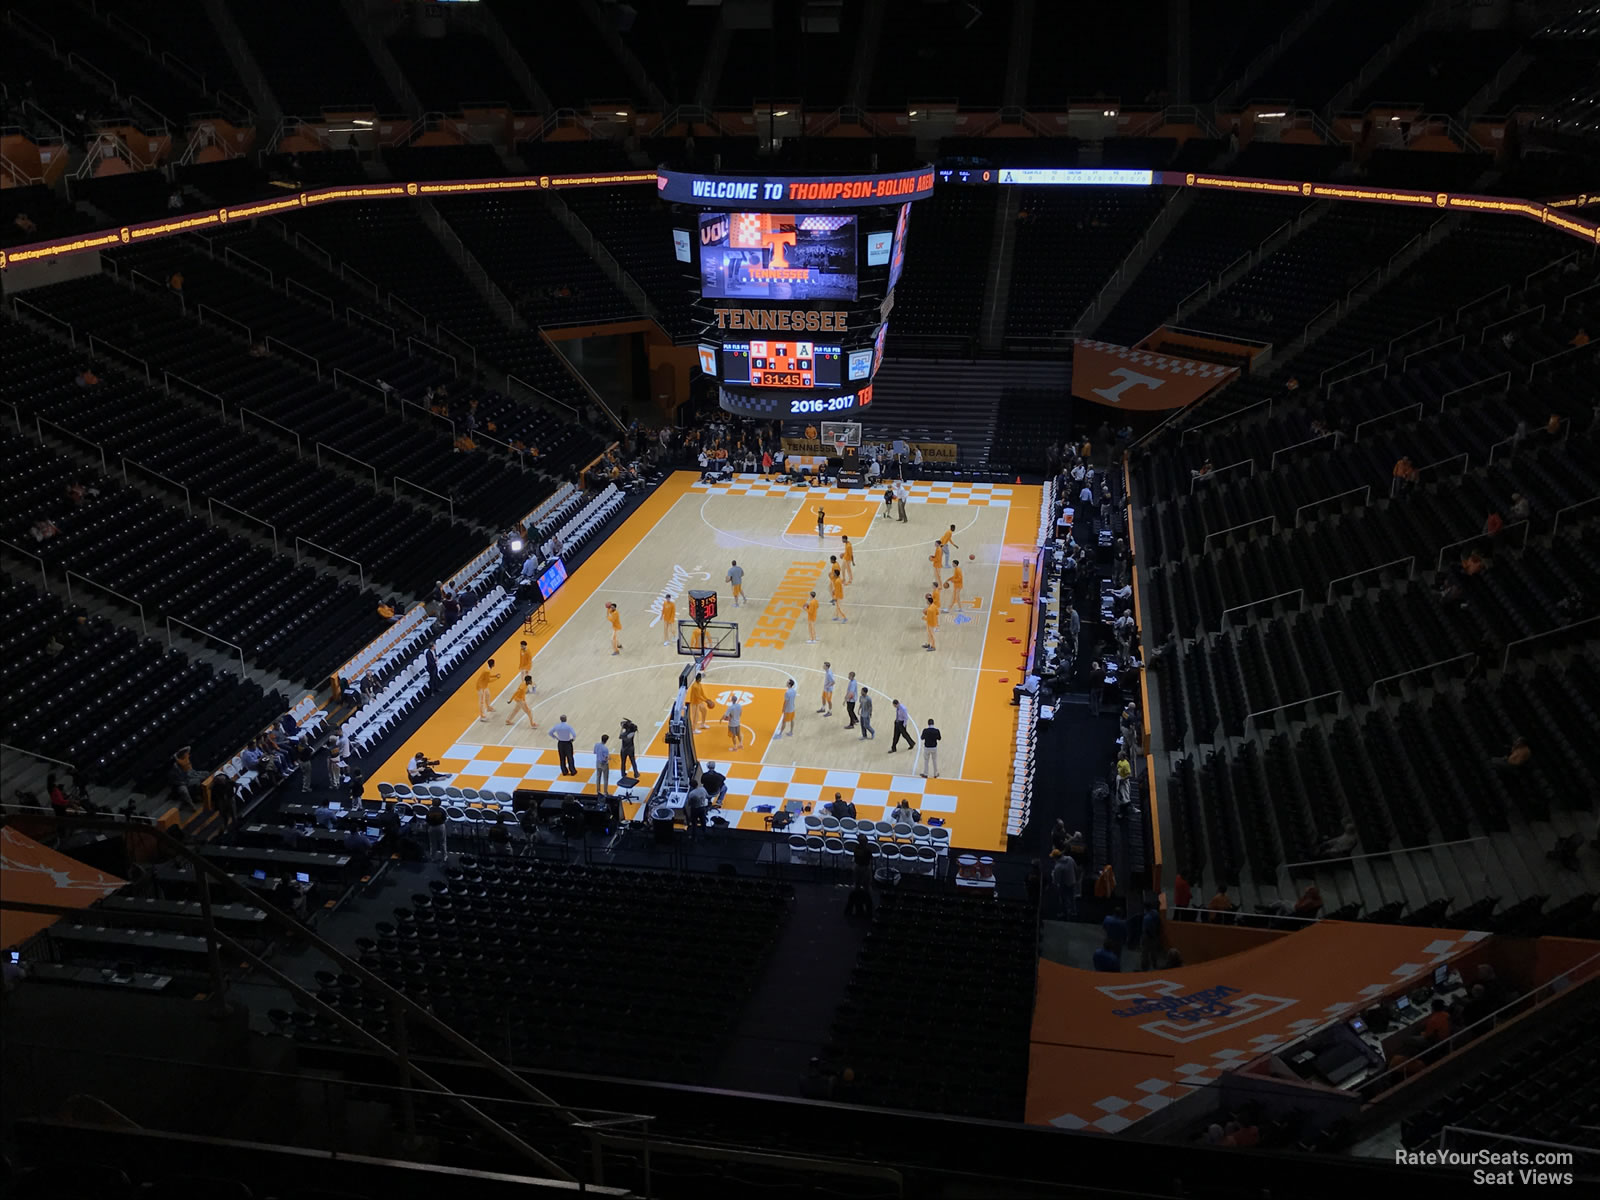 section 312, row 7 seat view  - thompson-boling arena